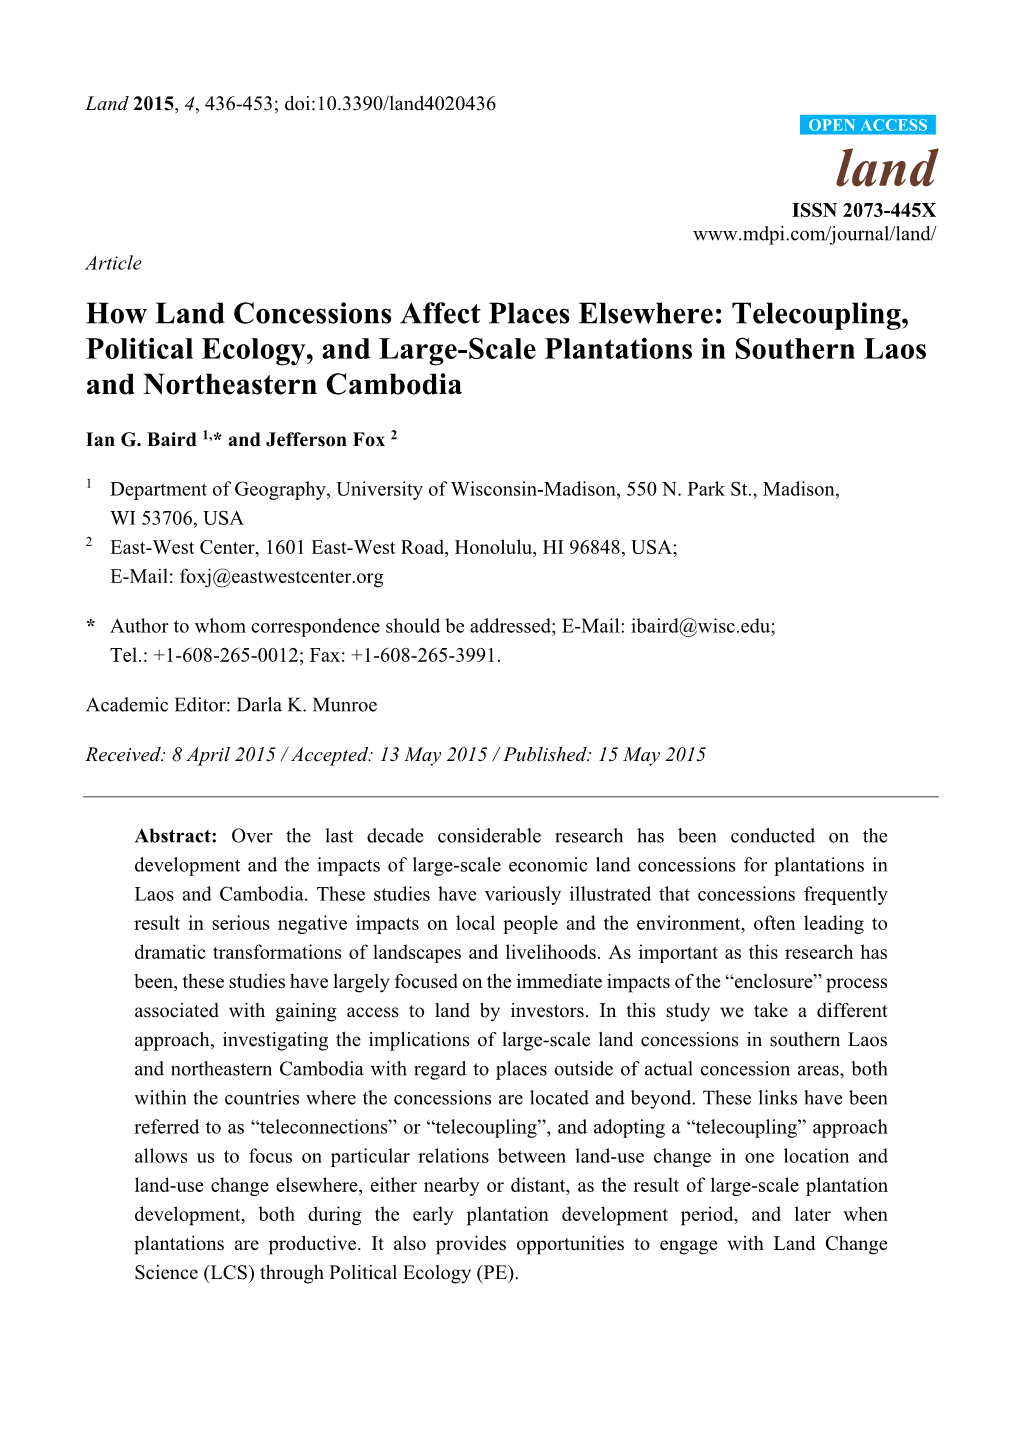 Telecoupling, Political Ecology, and Large-Scale Plantations in Southern Laos and Northeastern Cambodia